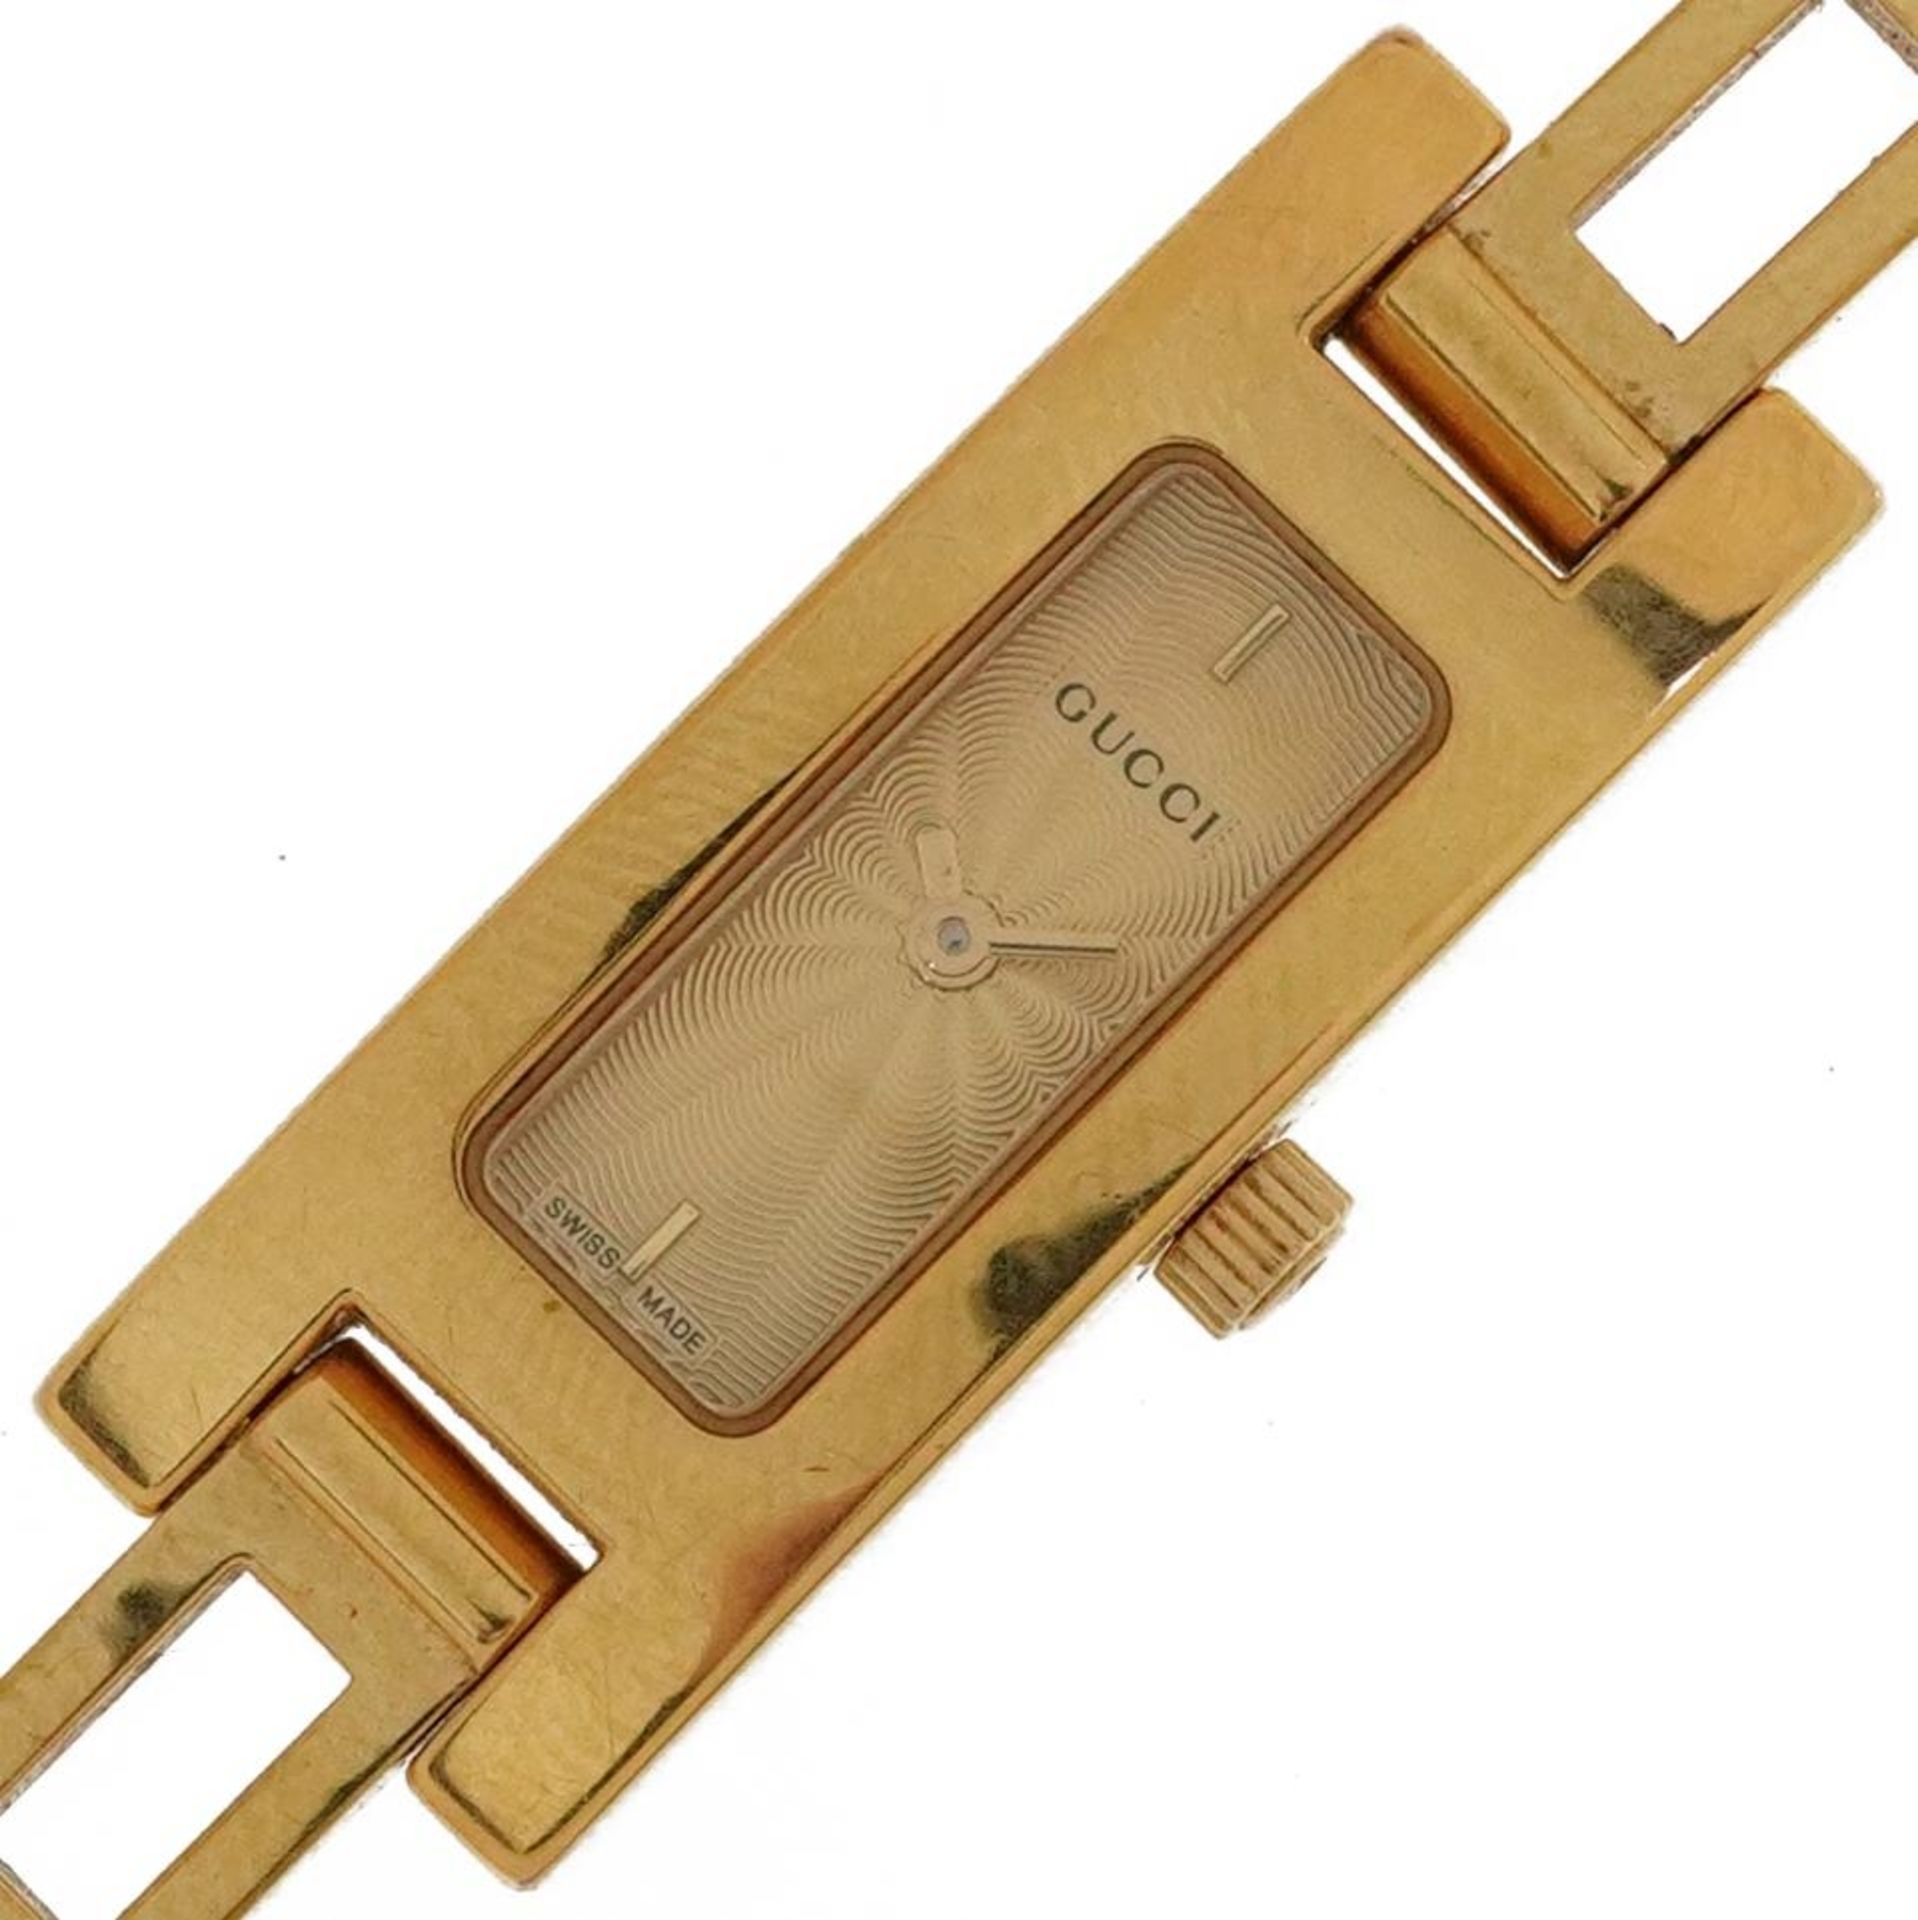 Gucci, ladies gold plated Gucci 3900L wristwatch, serial number 0193323, the case 12mm wide